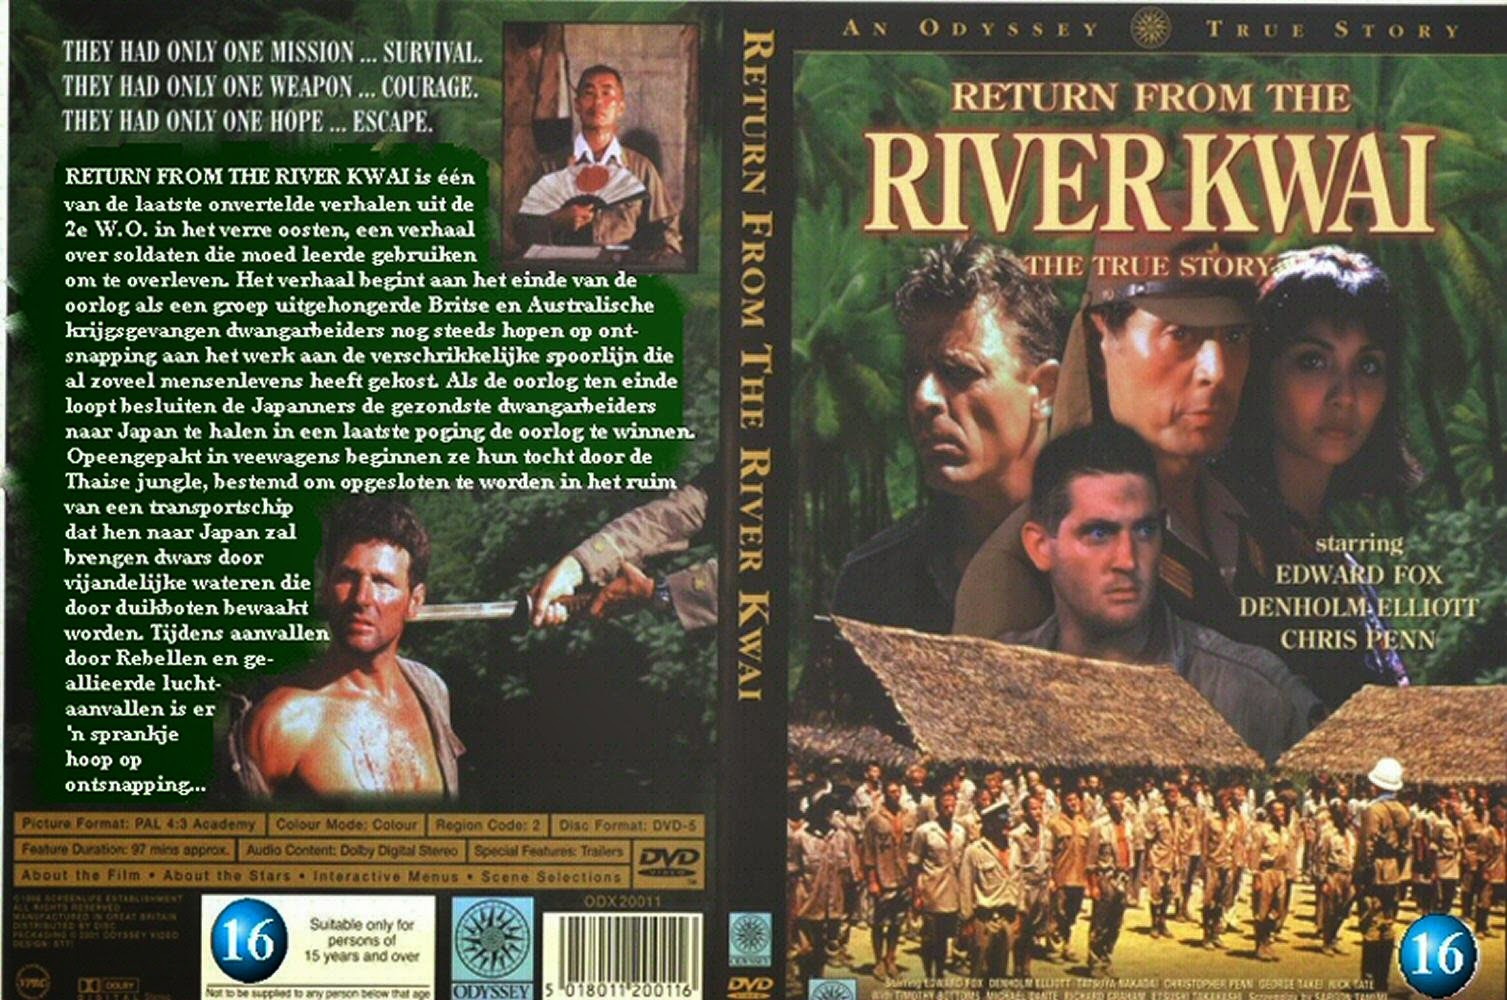 Return from the river kwai 1989